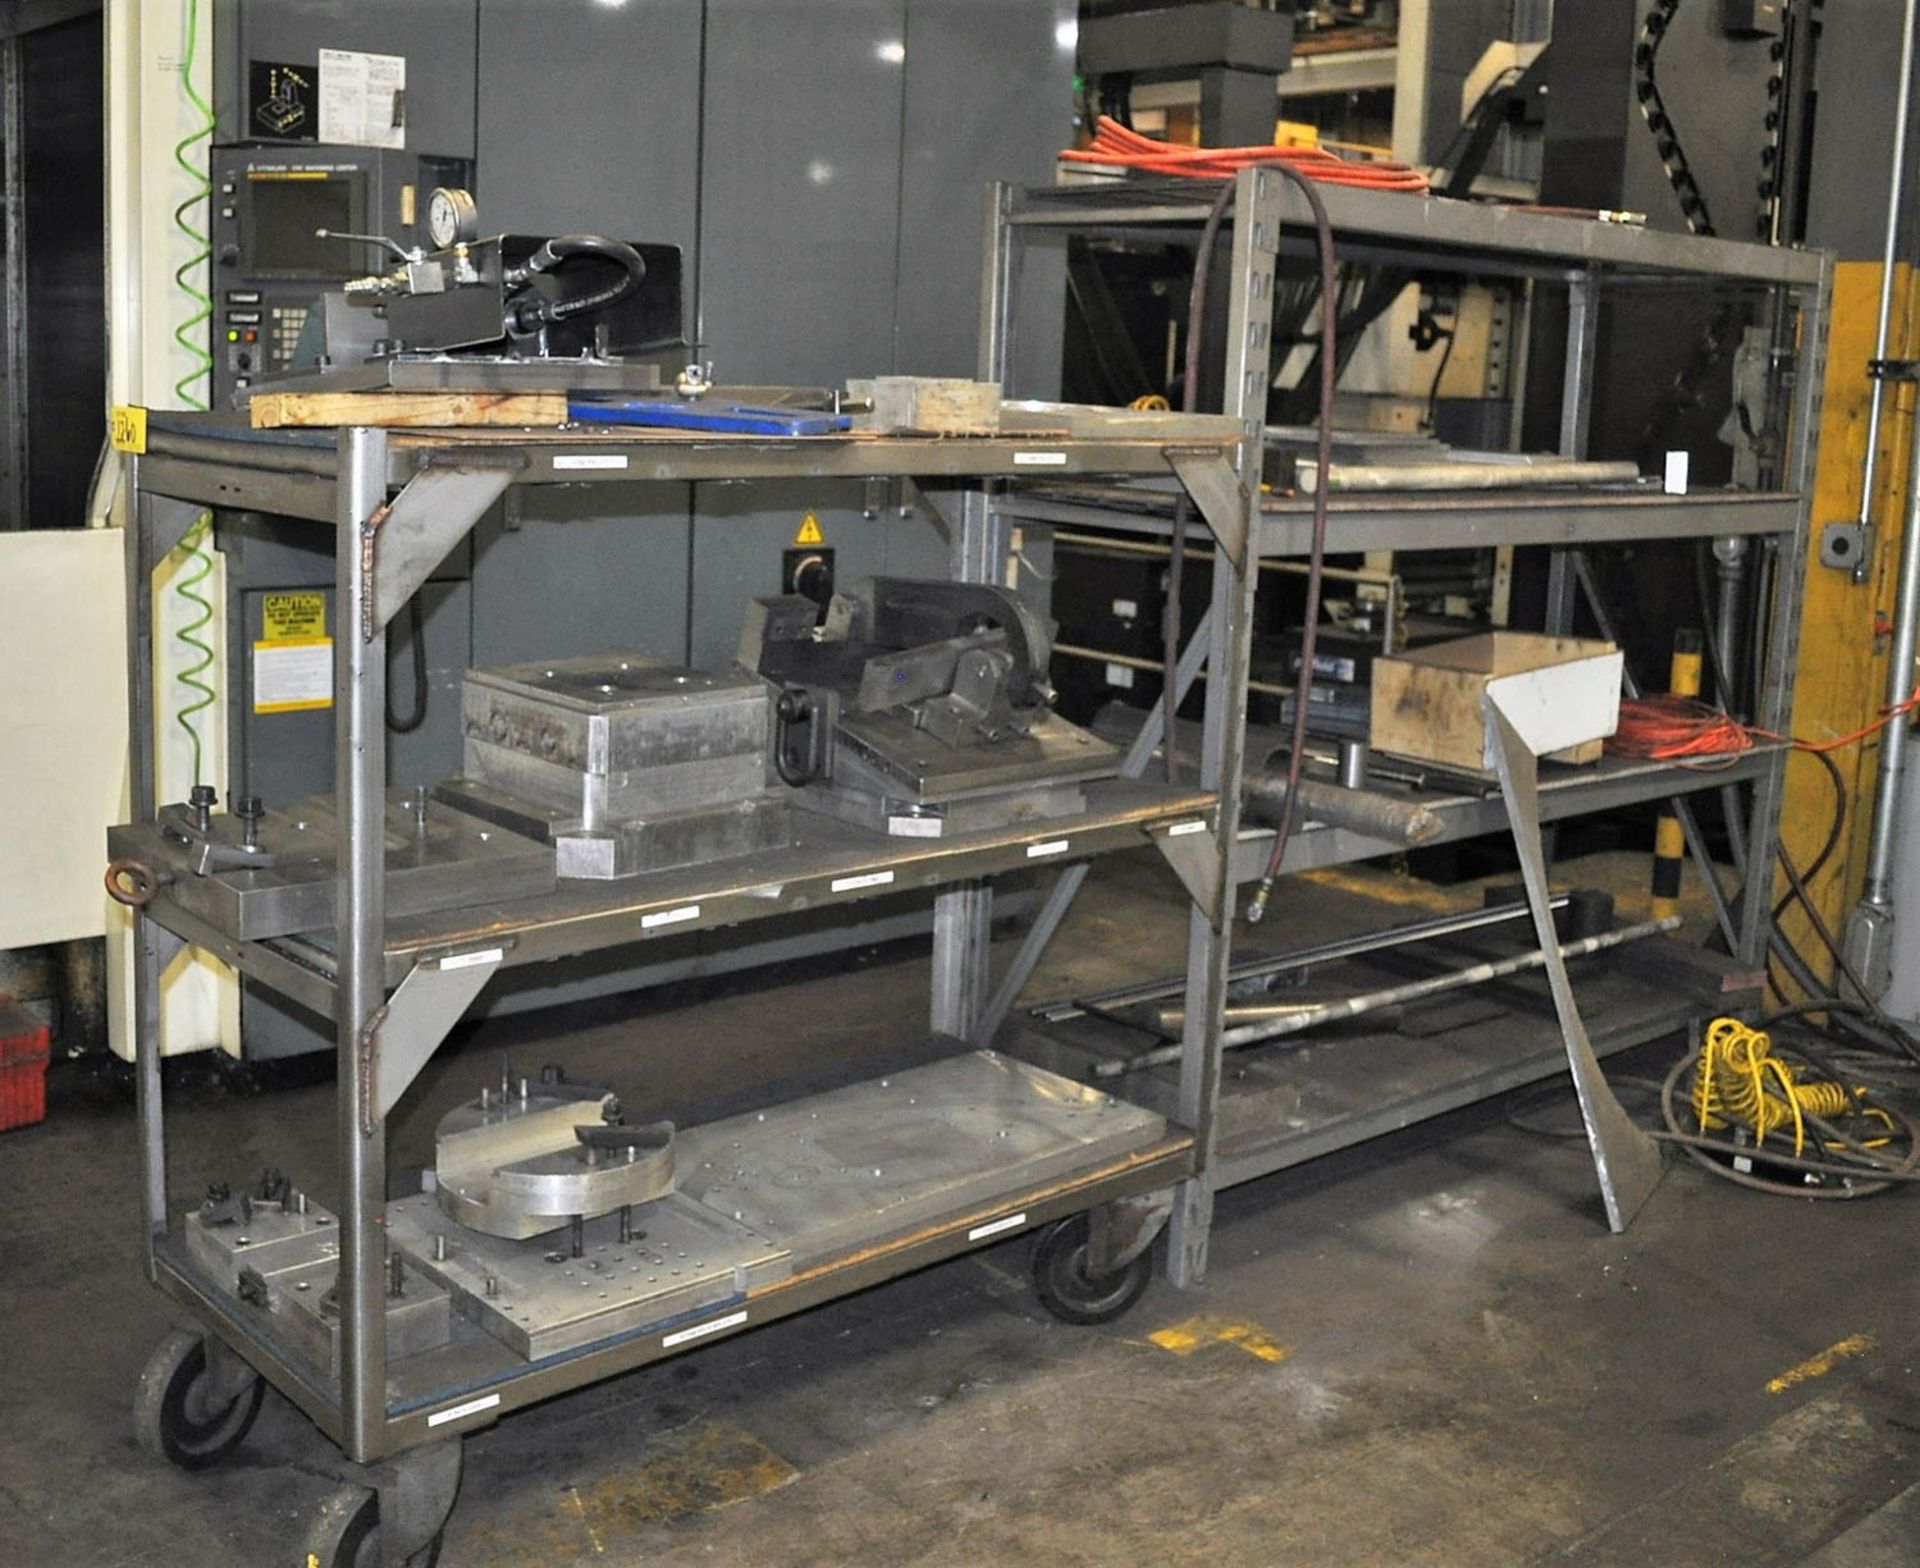 CART OF ASSORTED FIXTURE PLATES FOR HX400 MACHINE - Image 2 of 2